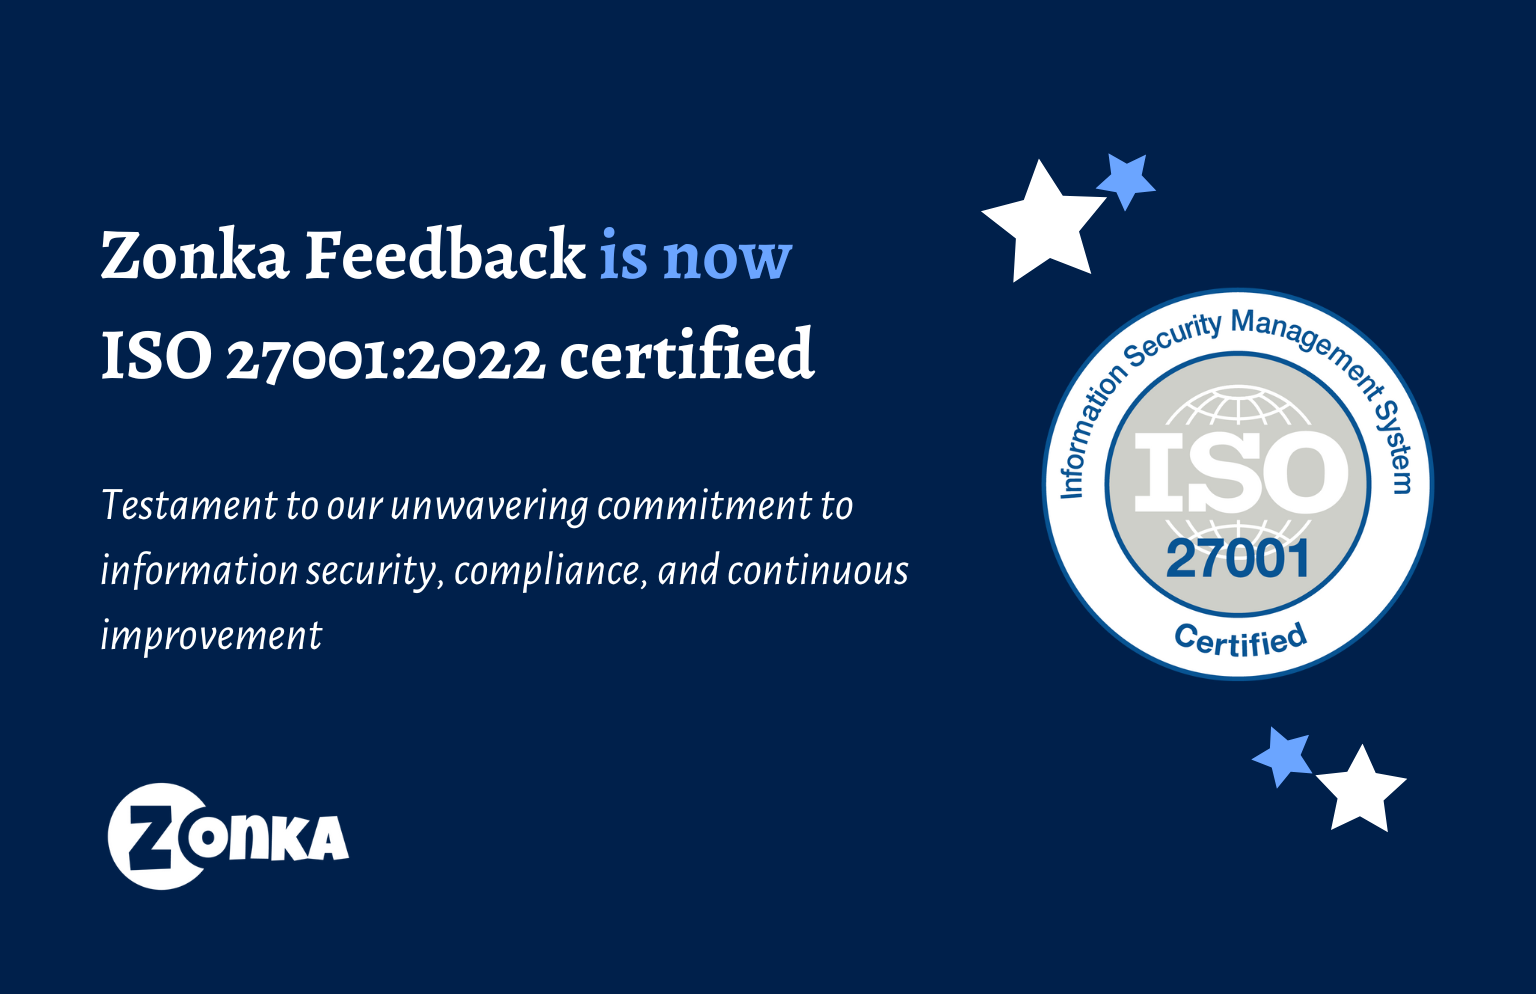 Zonka Feedback recognized as ‘Product Leader’ by Crozdesk in their Top 20 Employee Engagement Software Products list of 2020